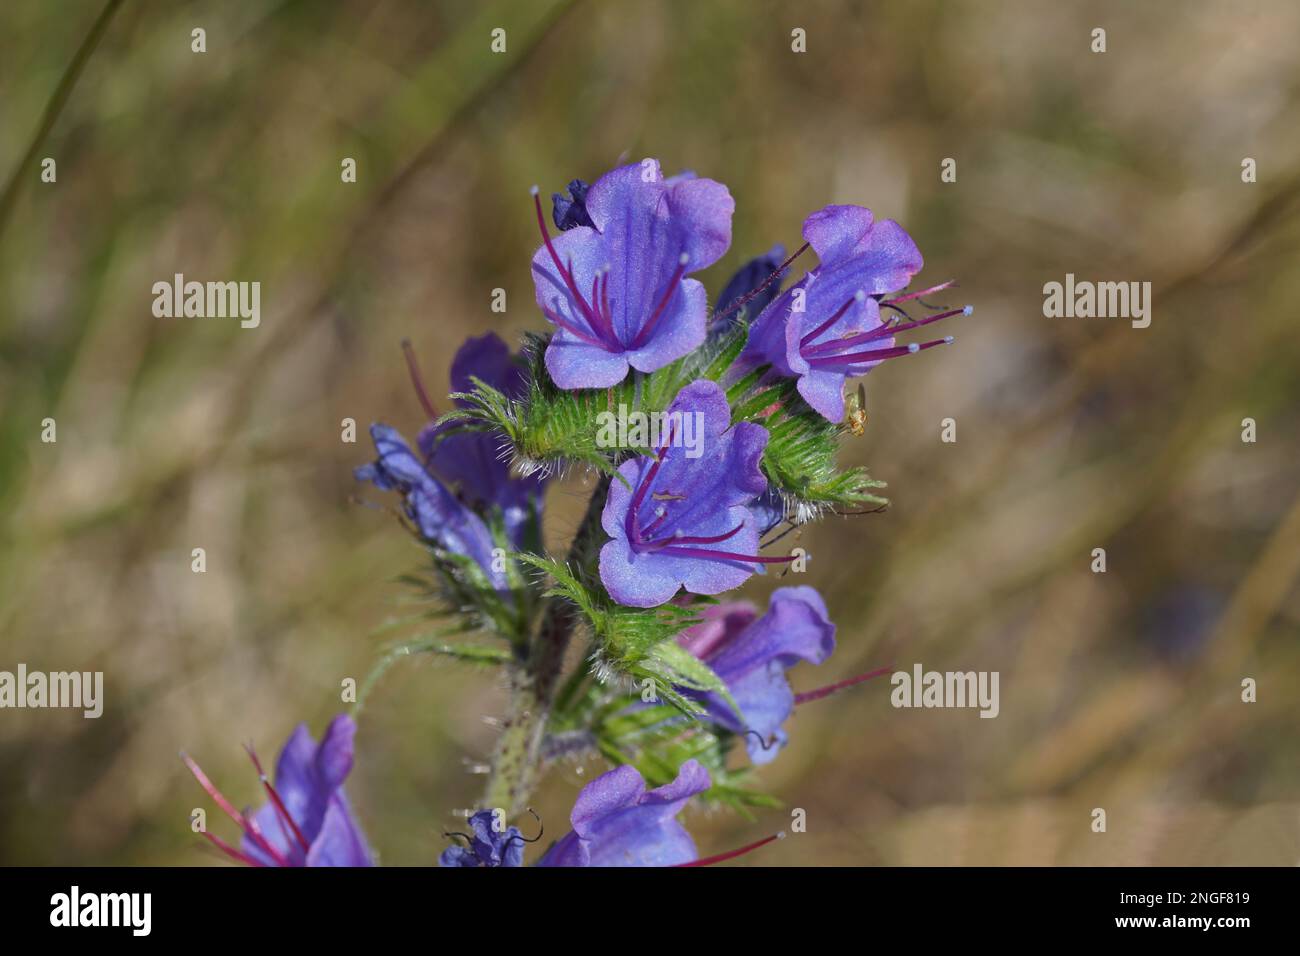 Close up flowering viper's bugloss, blueweed (Echium vulgare) of the borage family Boraginaceae. Blurred tall grass on the background. July, Holland Stock Photo